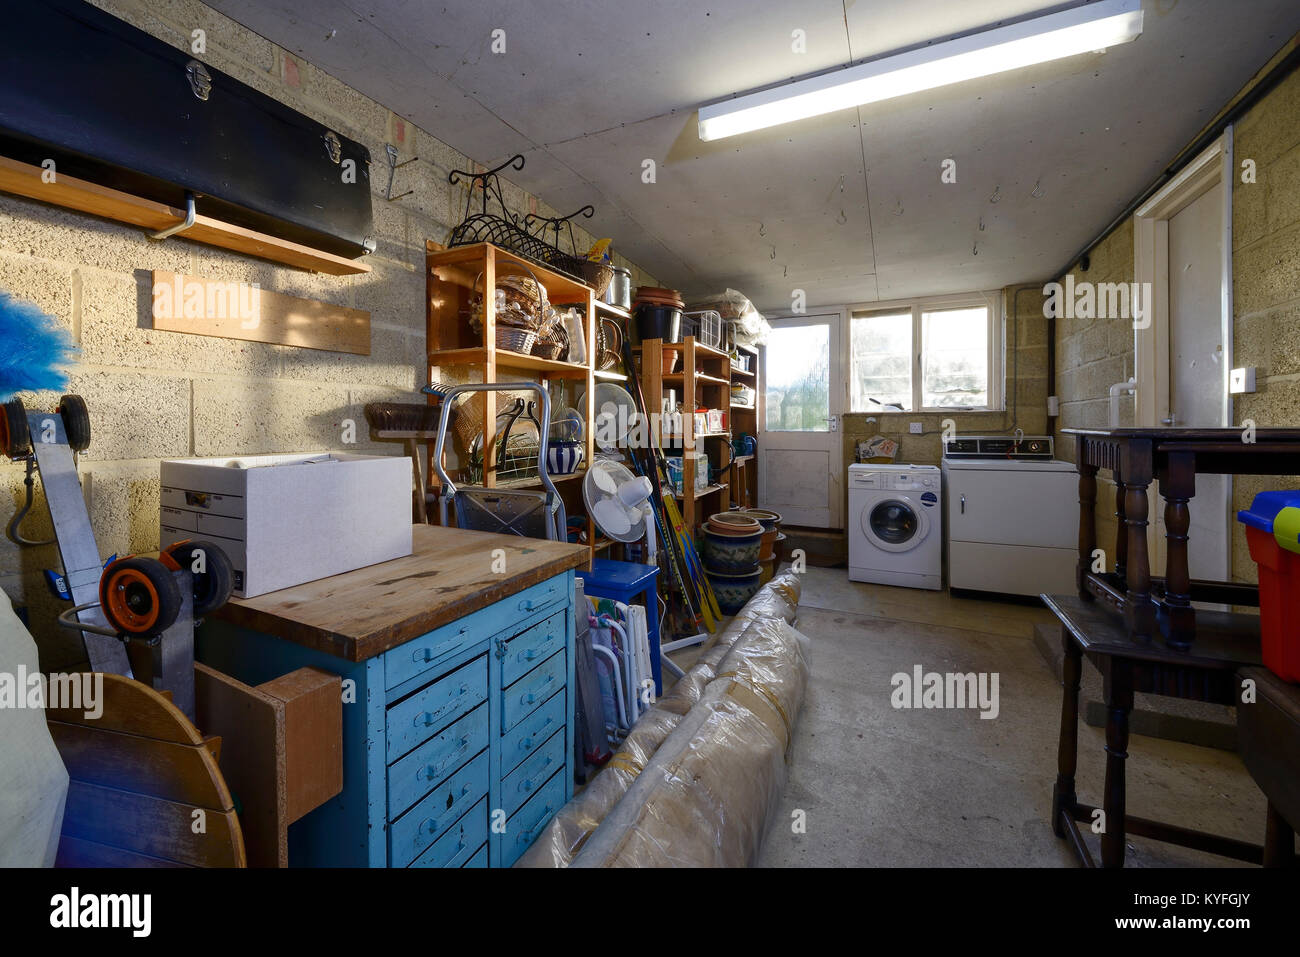 Interior of a domestic garage filled with possessions Stock Photo